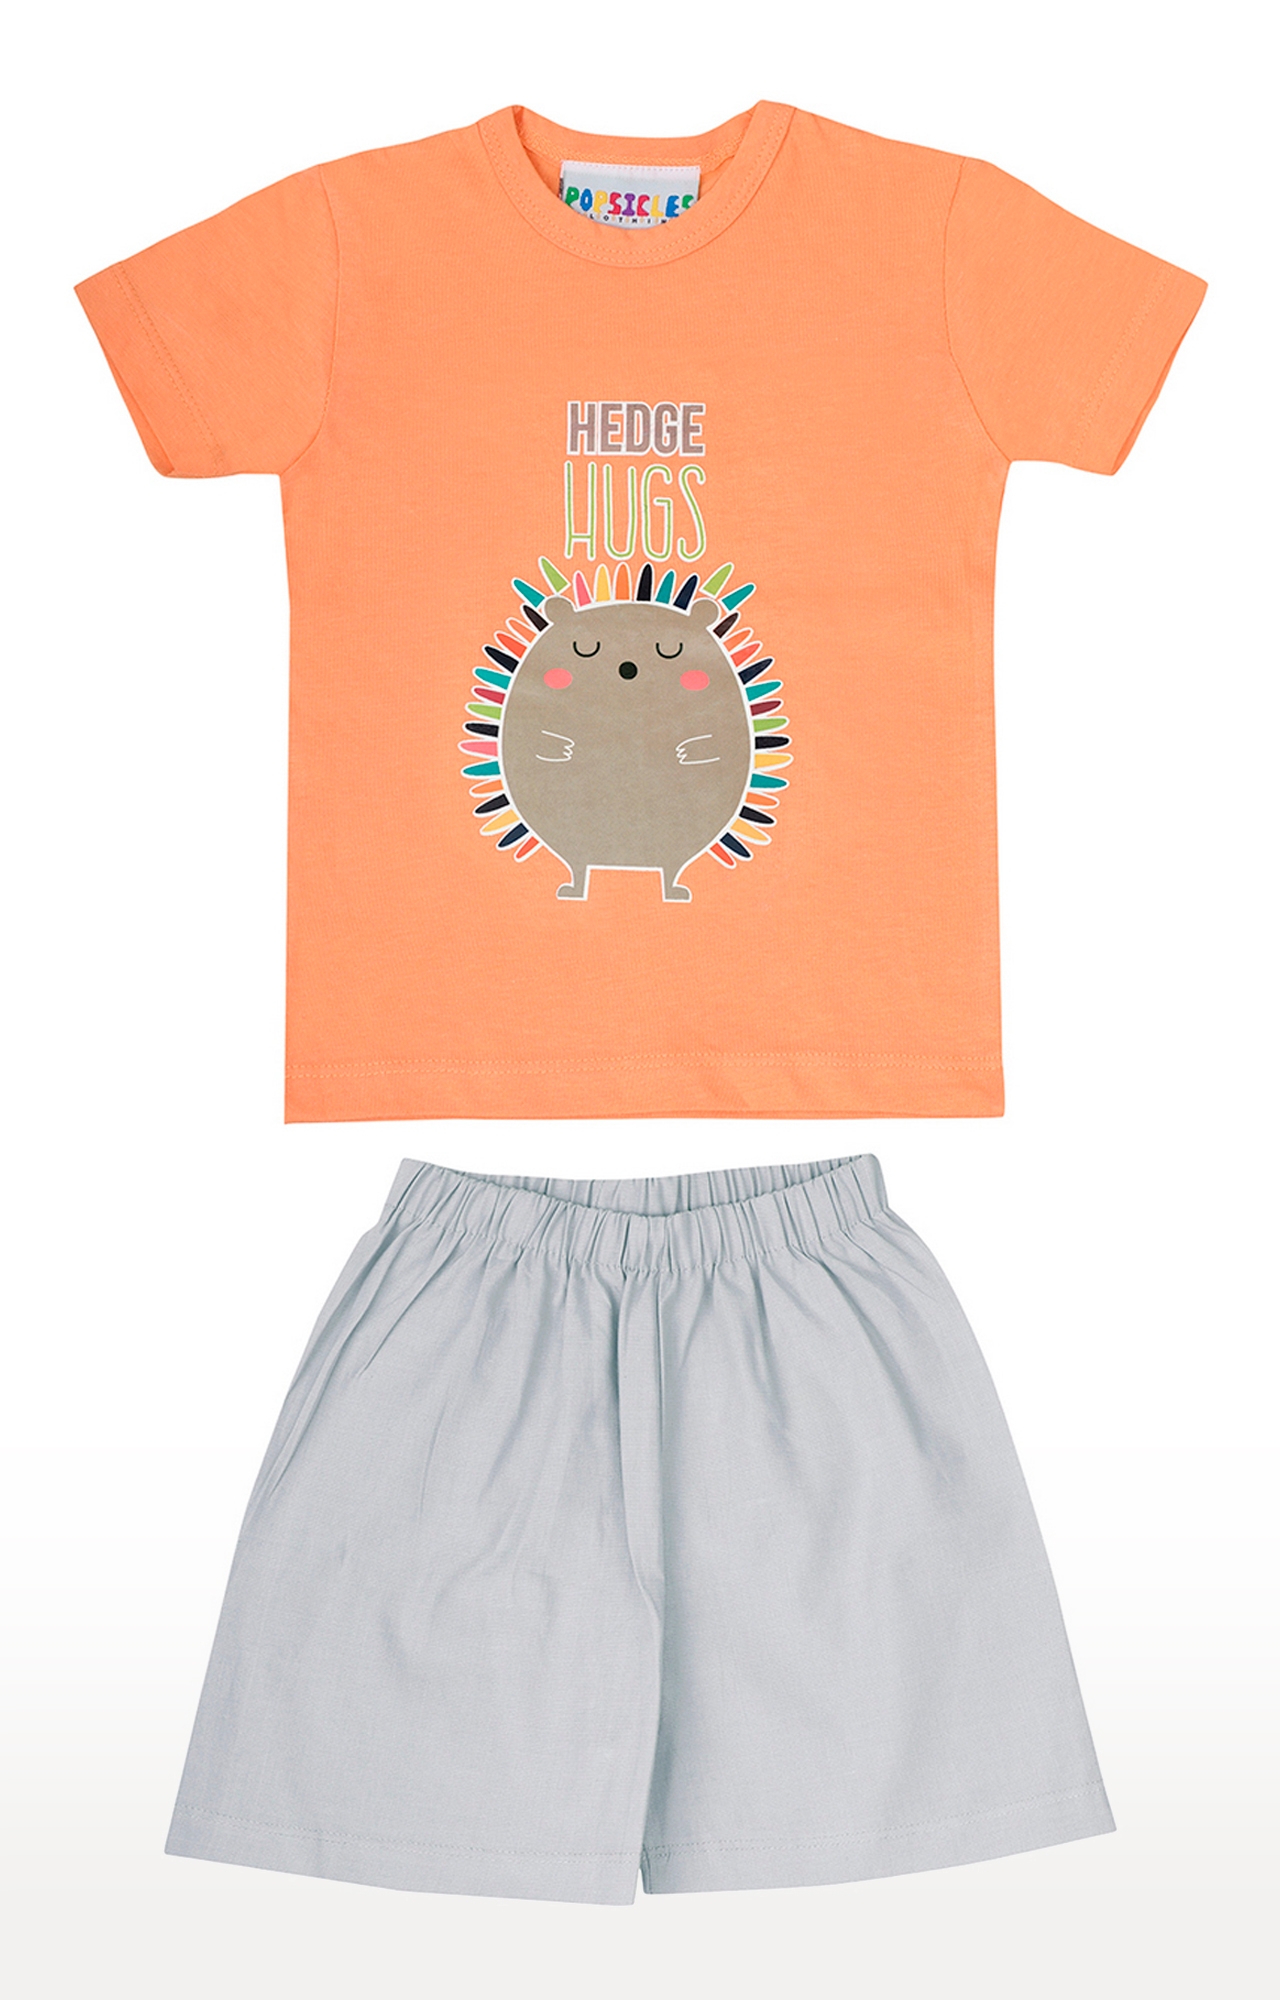 Popsicles Clothing | Popsicles Soft Cotton Comfort fit Round Neck Short Sleeves T-Shirt and Shorts Set for Boys - Orange (0-6M)